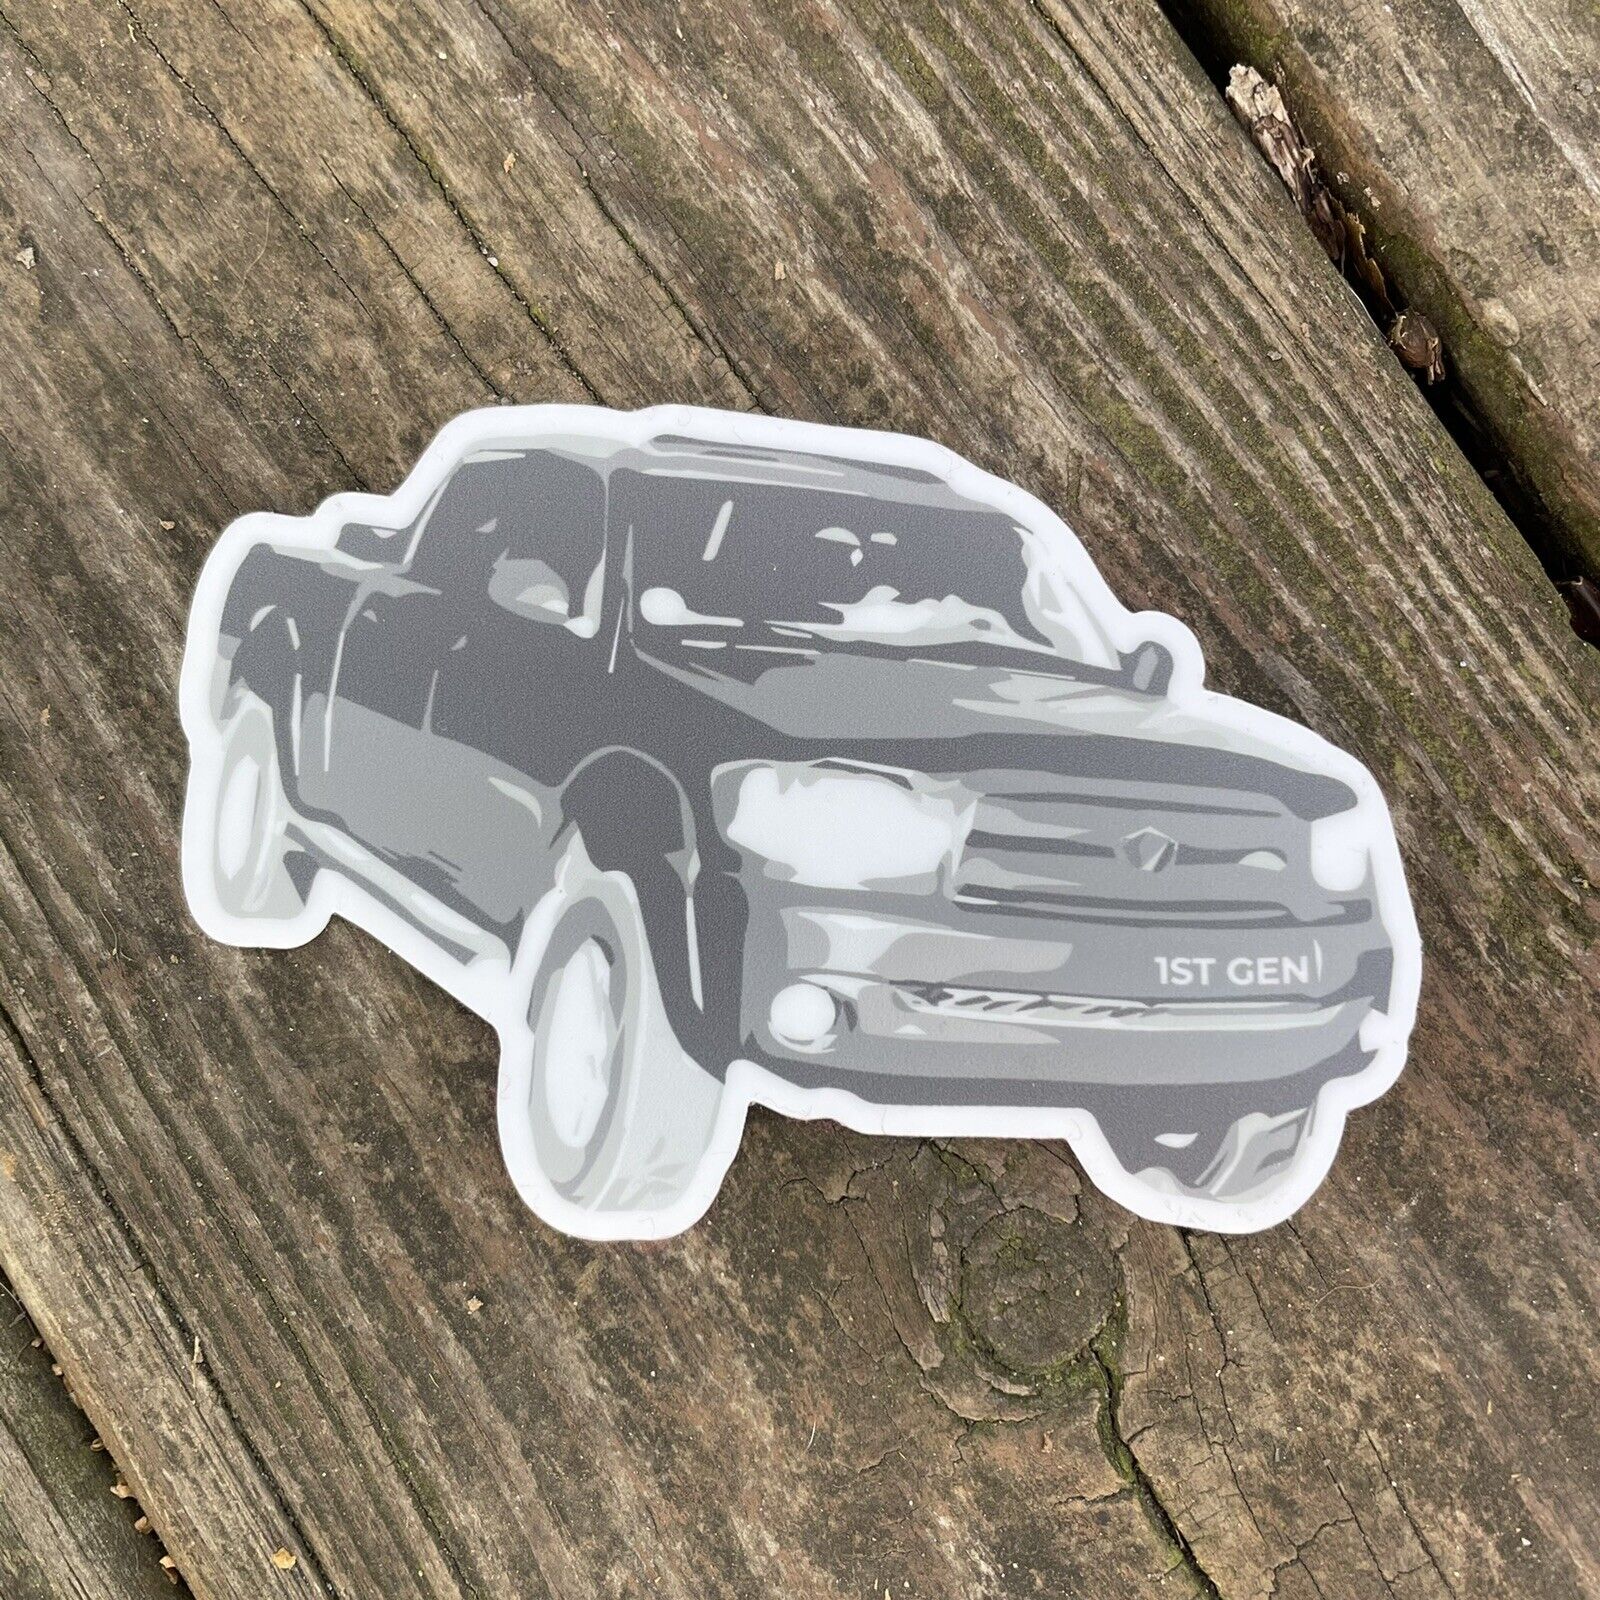 Toyota Tundra 1st Gen Truck 200-2006 Sticker Decal - MADE IN THE USA